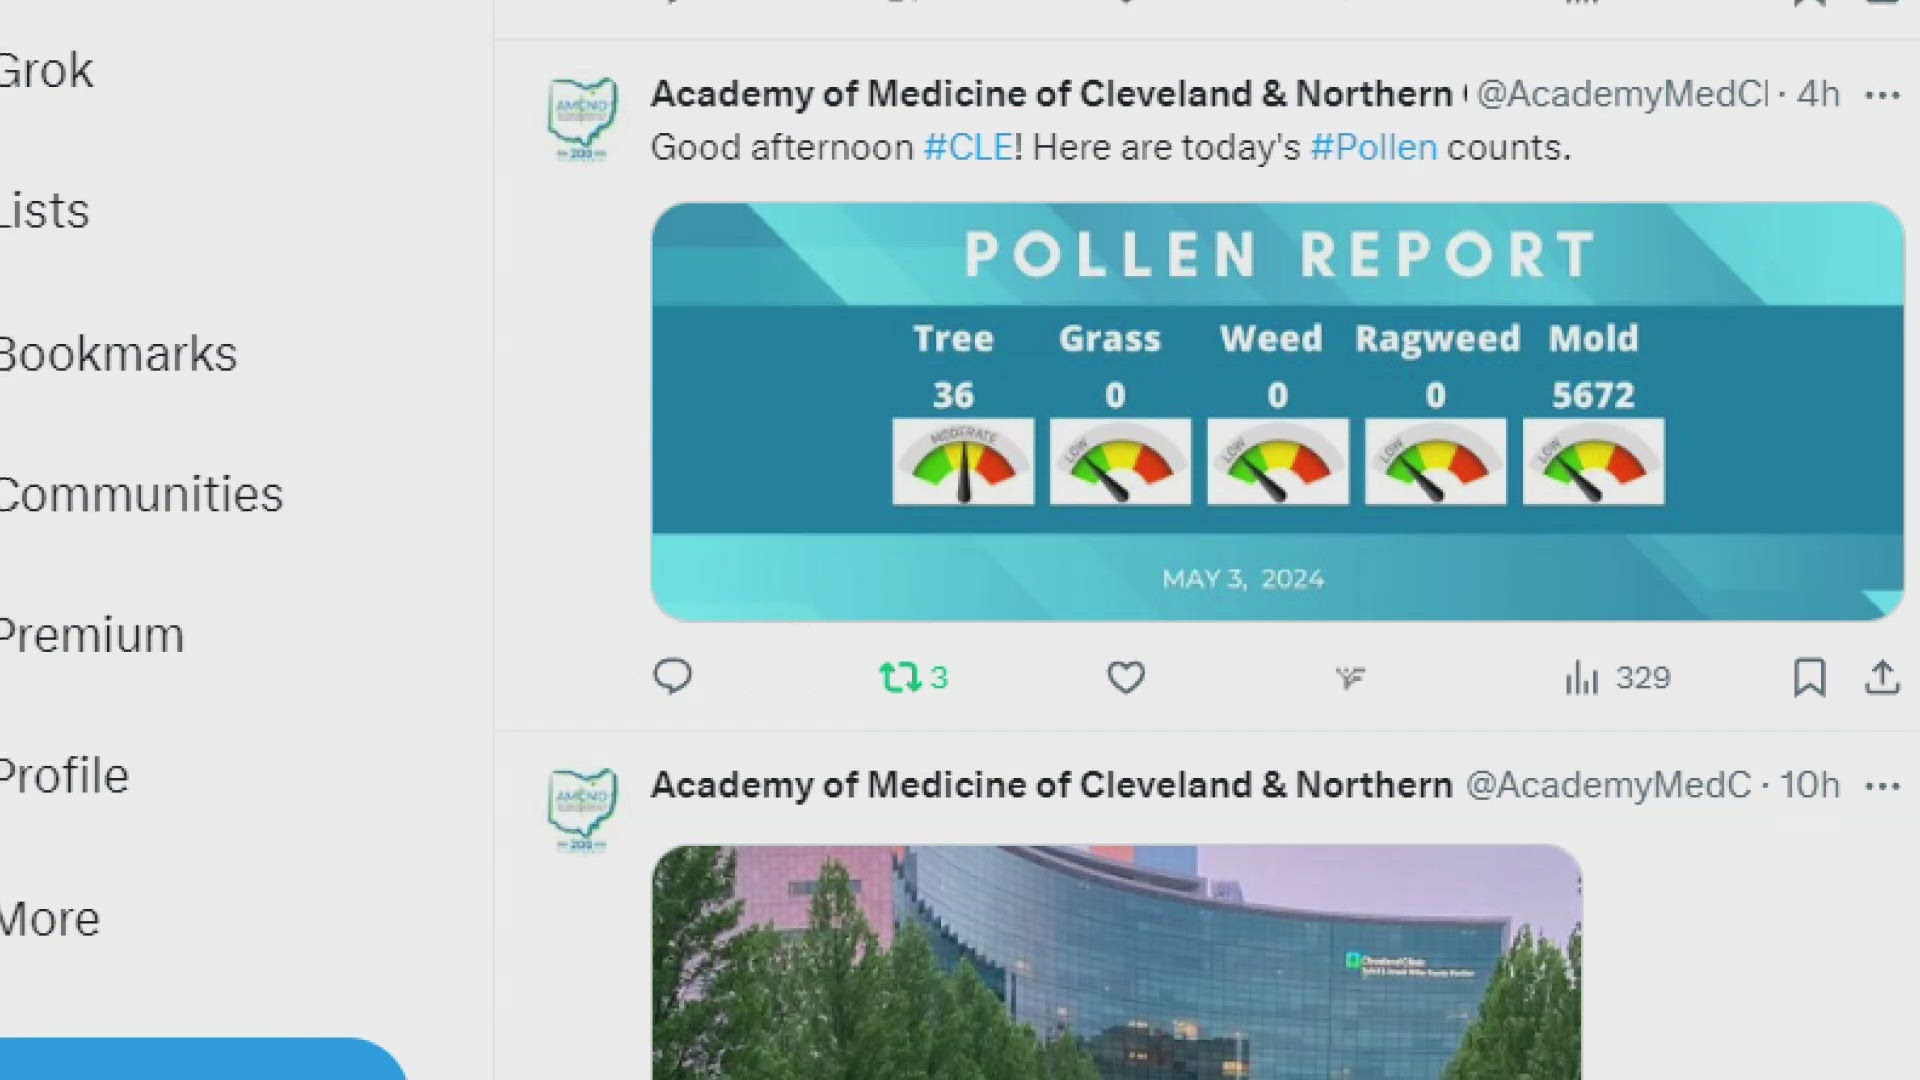 The Academy started tracking pollen levels in 1940.